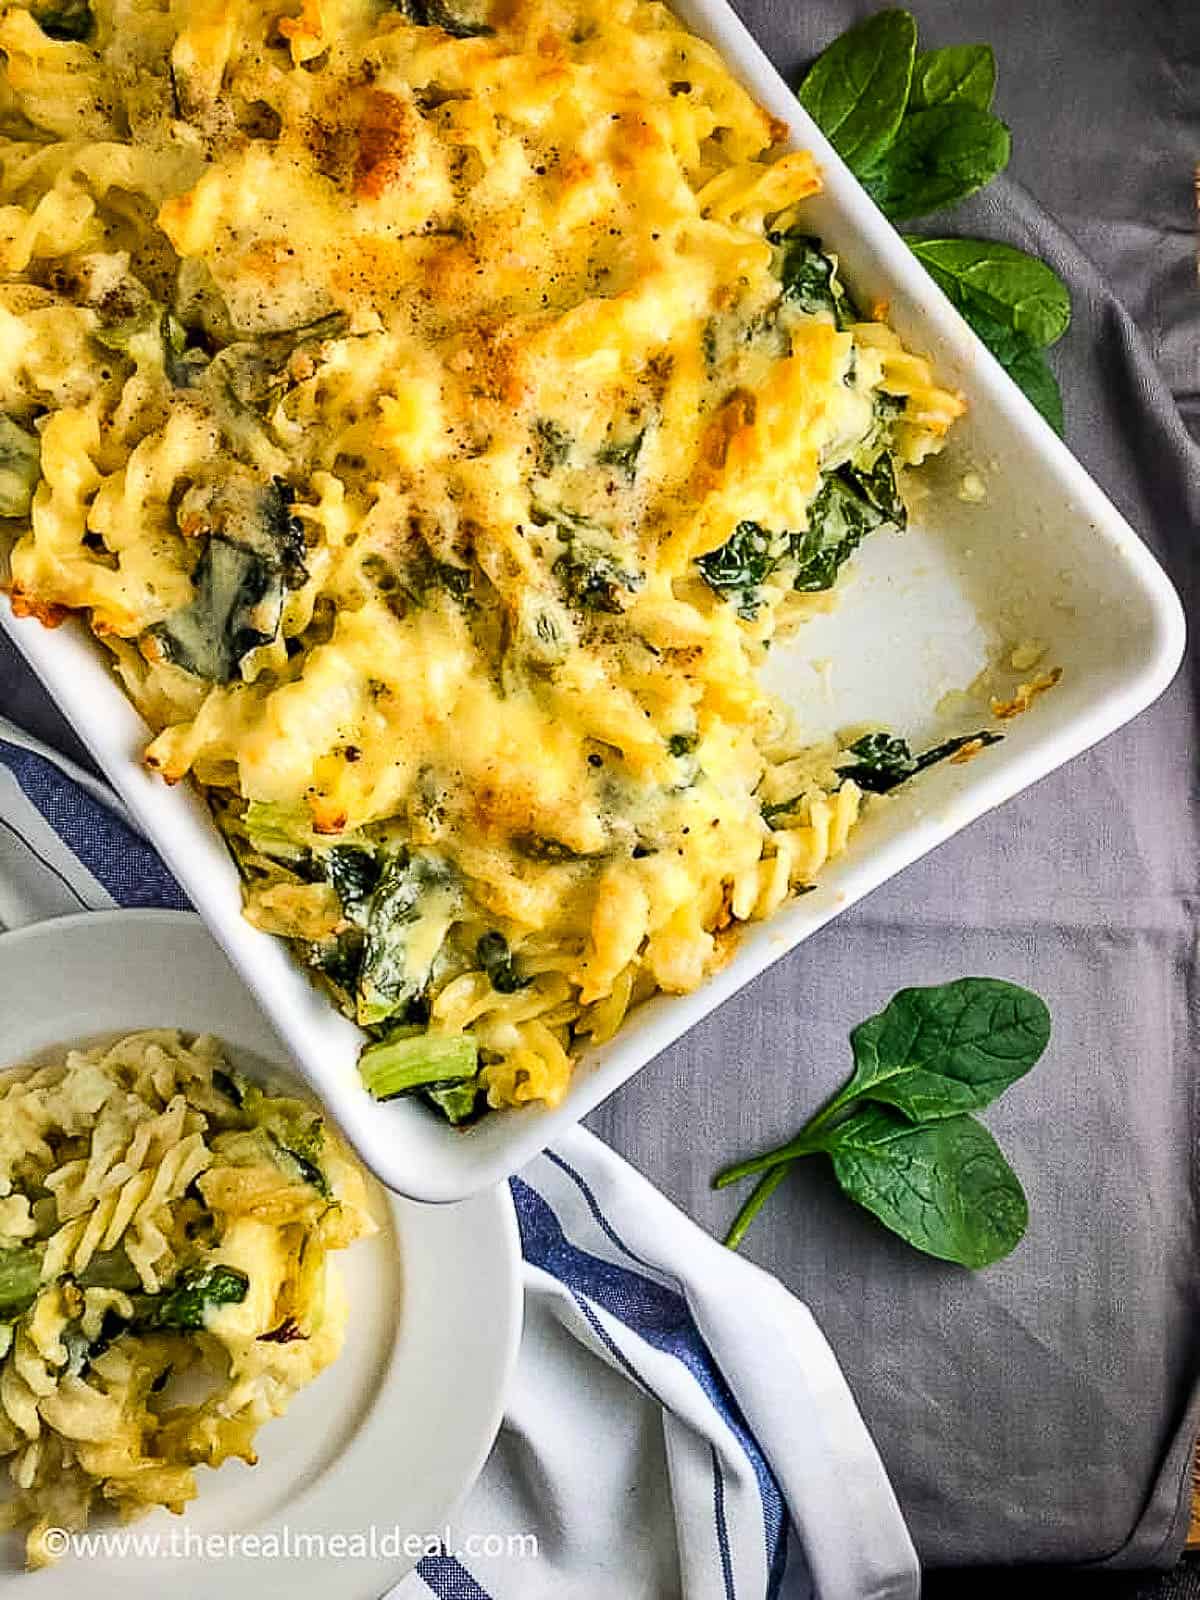 cauliflower cheese pasta bake with spinach in tray portion removed and served on a plate to side